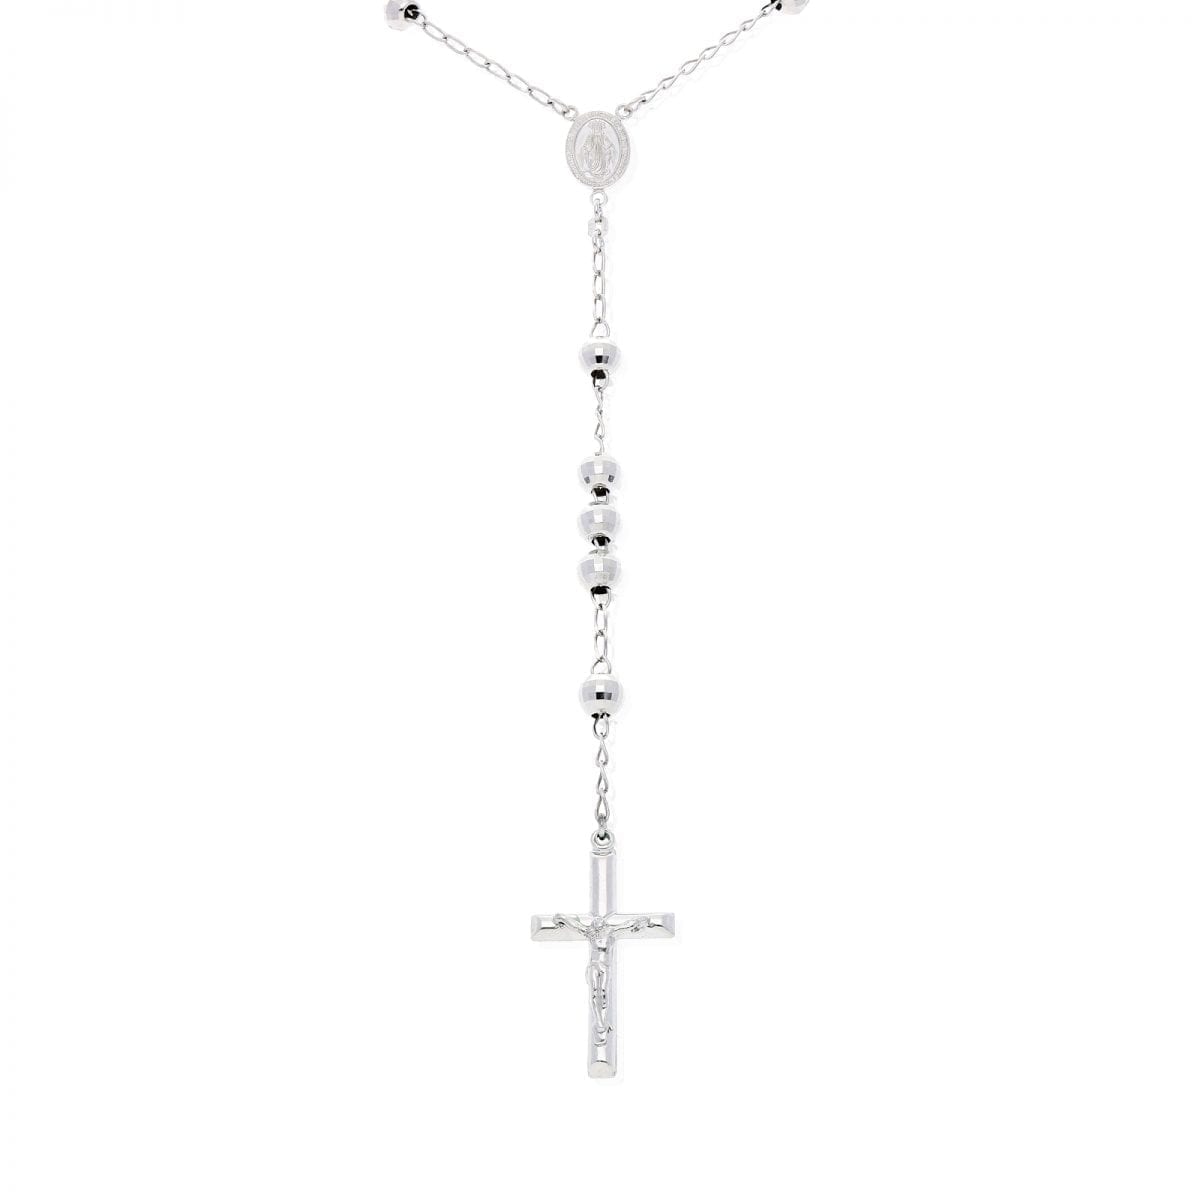 925 Sterling Silver 7mm Diamond Cut Rosary Cross Chain Necklace 26"